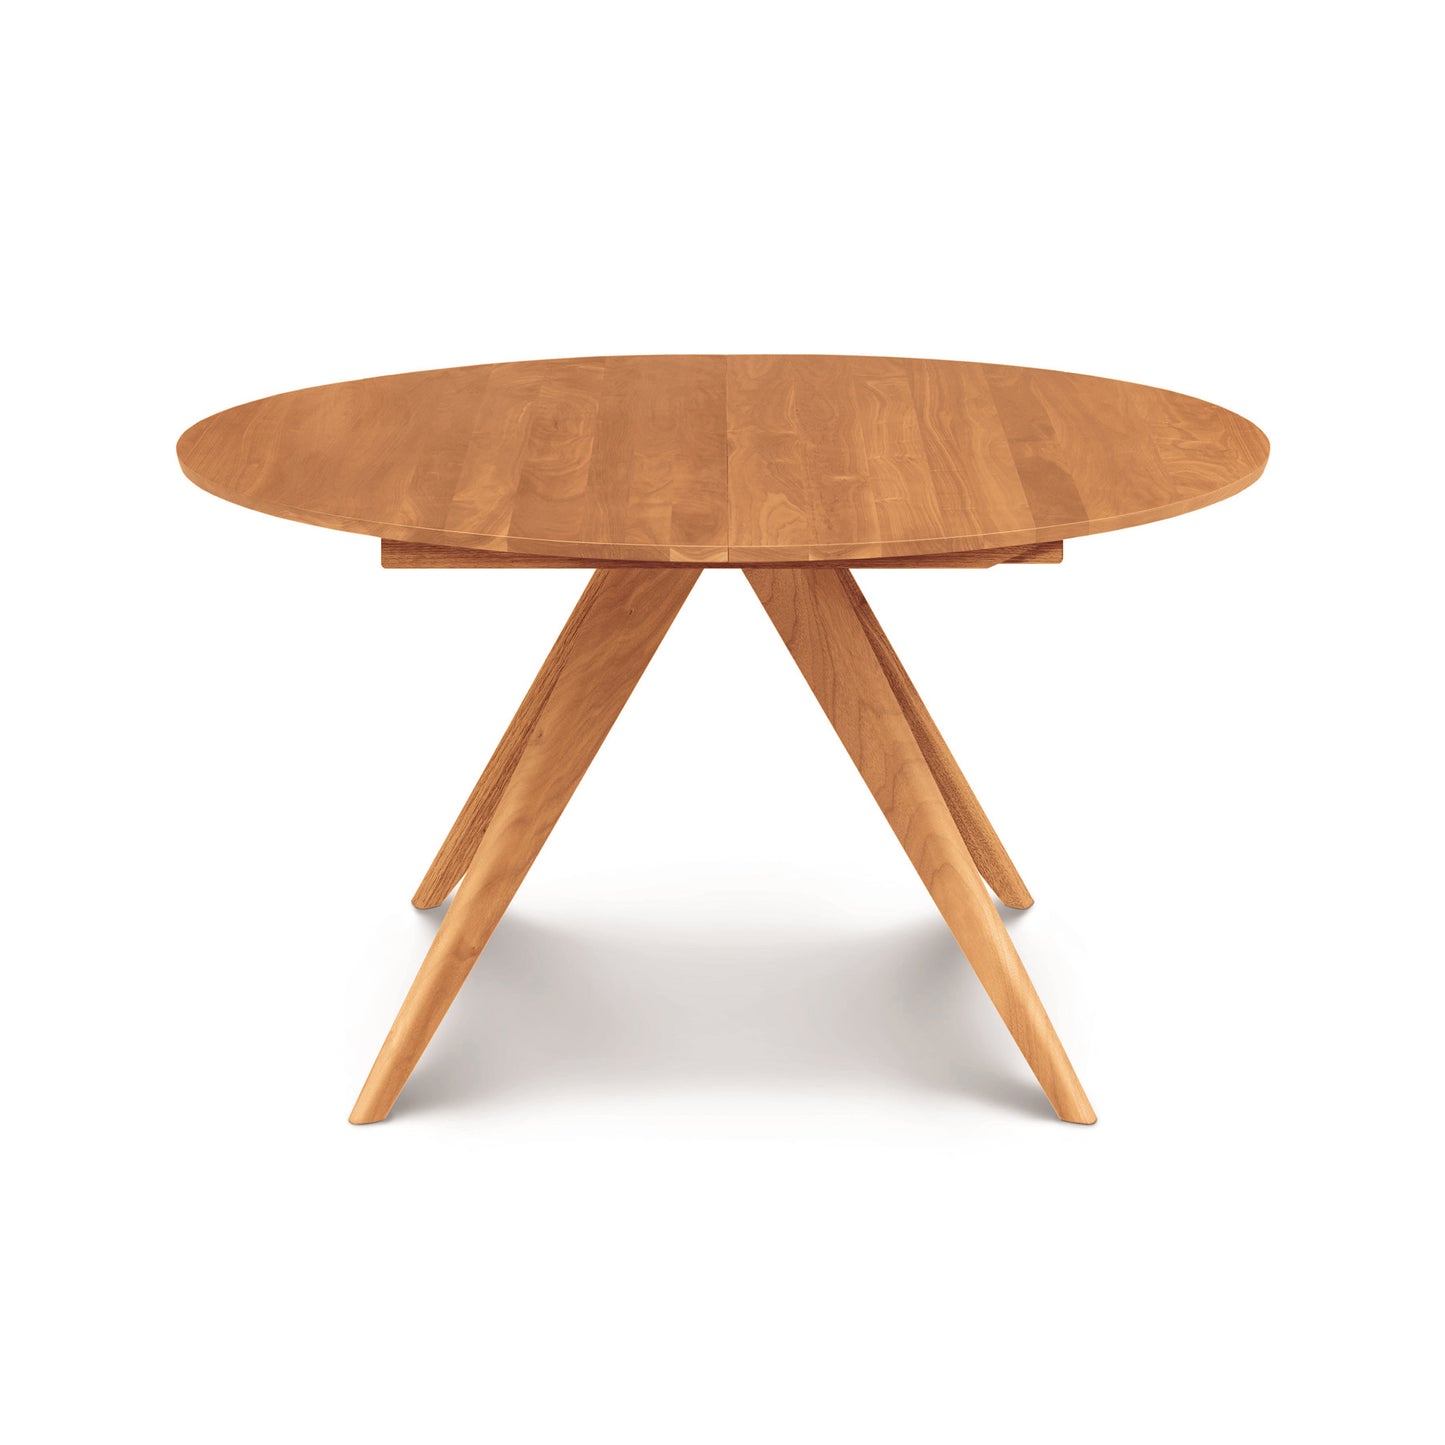 Round Catalina Round Extension Table, crafted from solid North American wood with a symmetrical cross base, isolated on a white background.